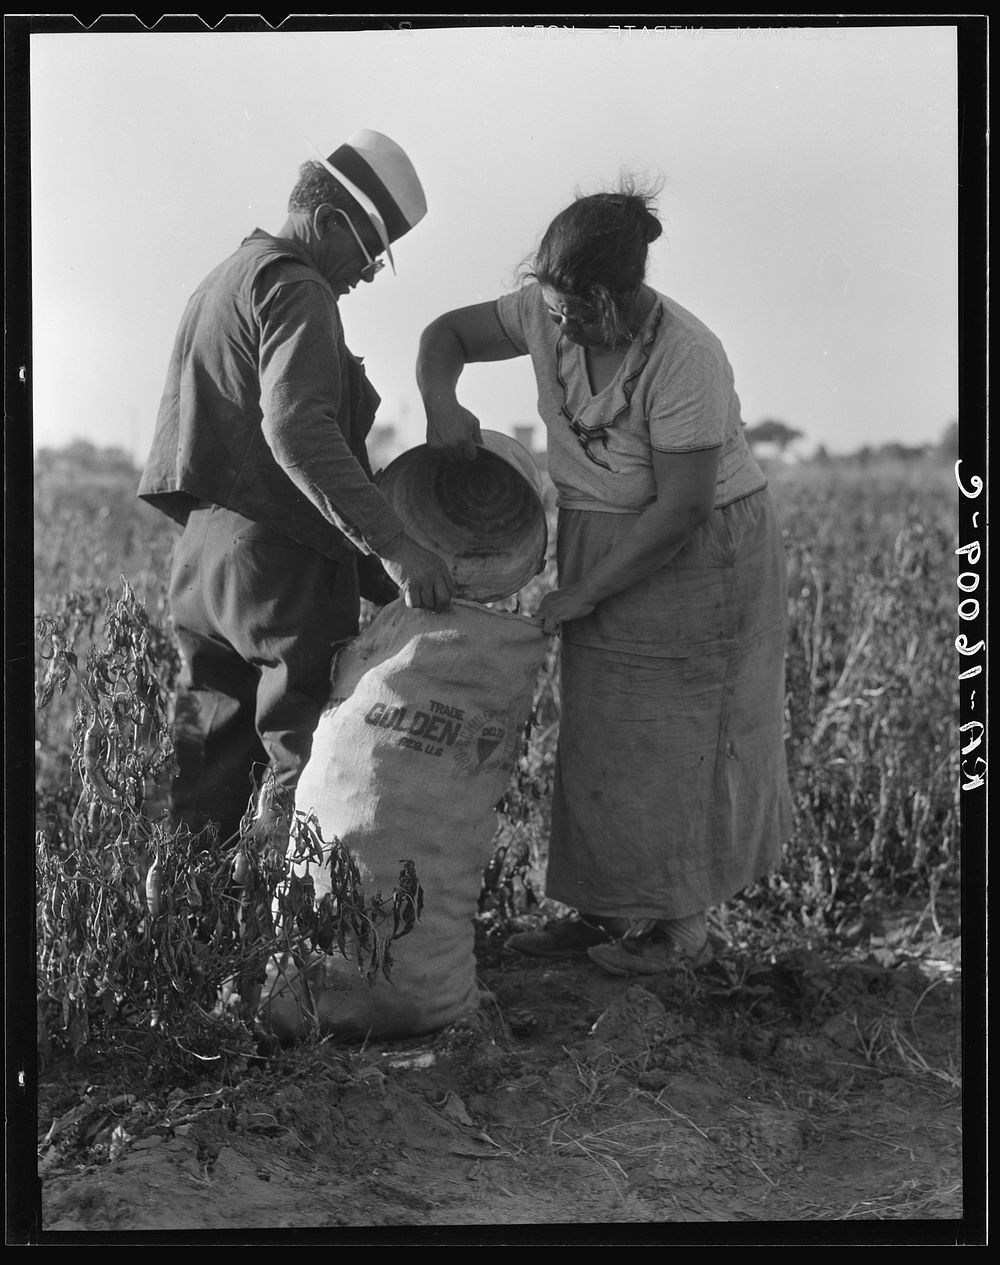 Mexican townfolk sacking peppers near Stockton, California. Sourced from the Library of Congress.